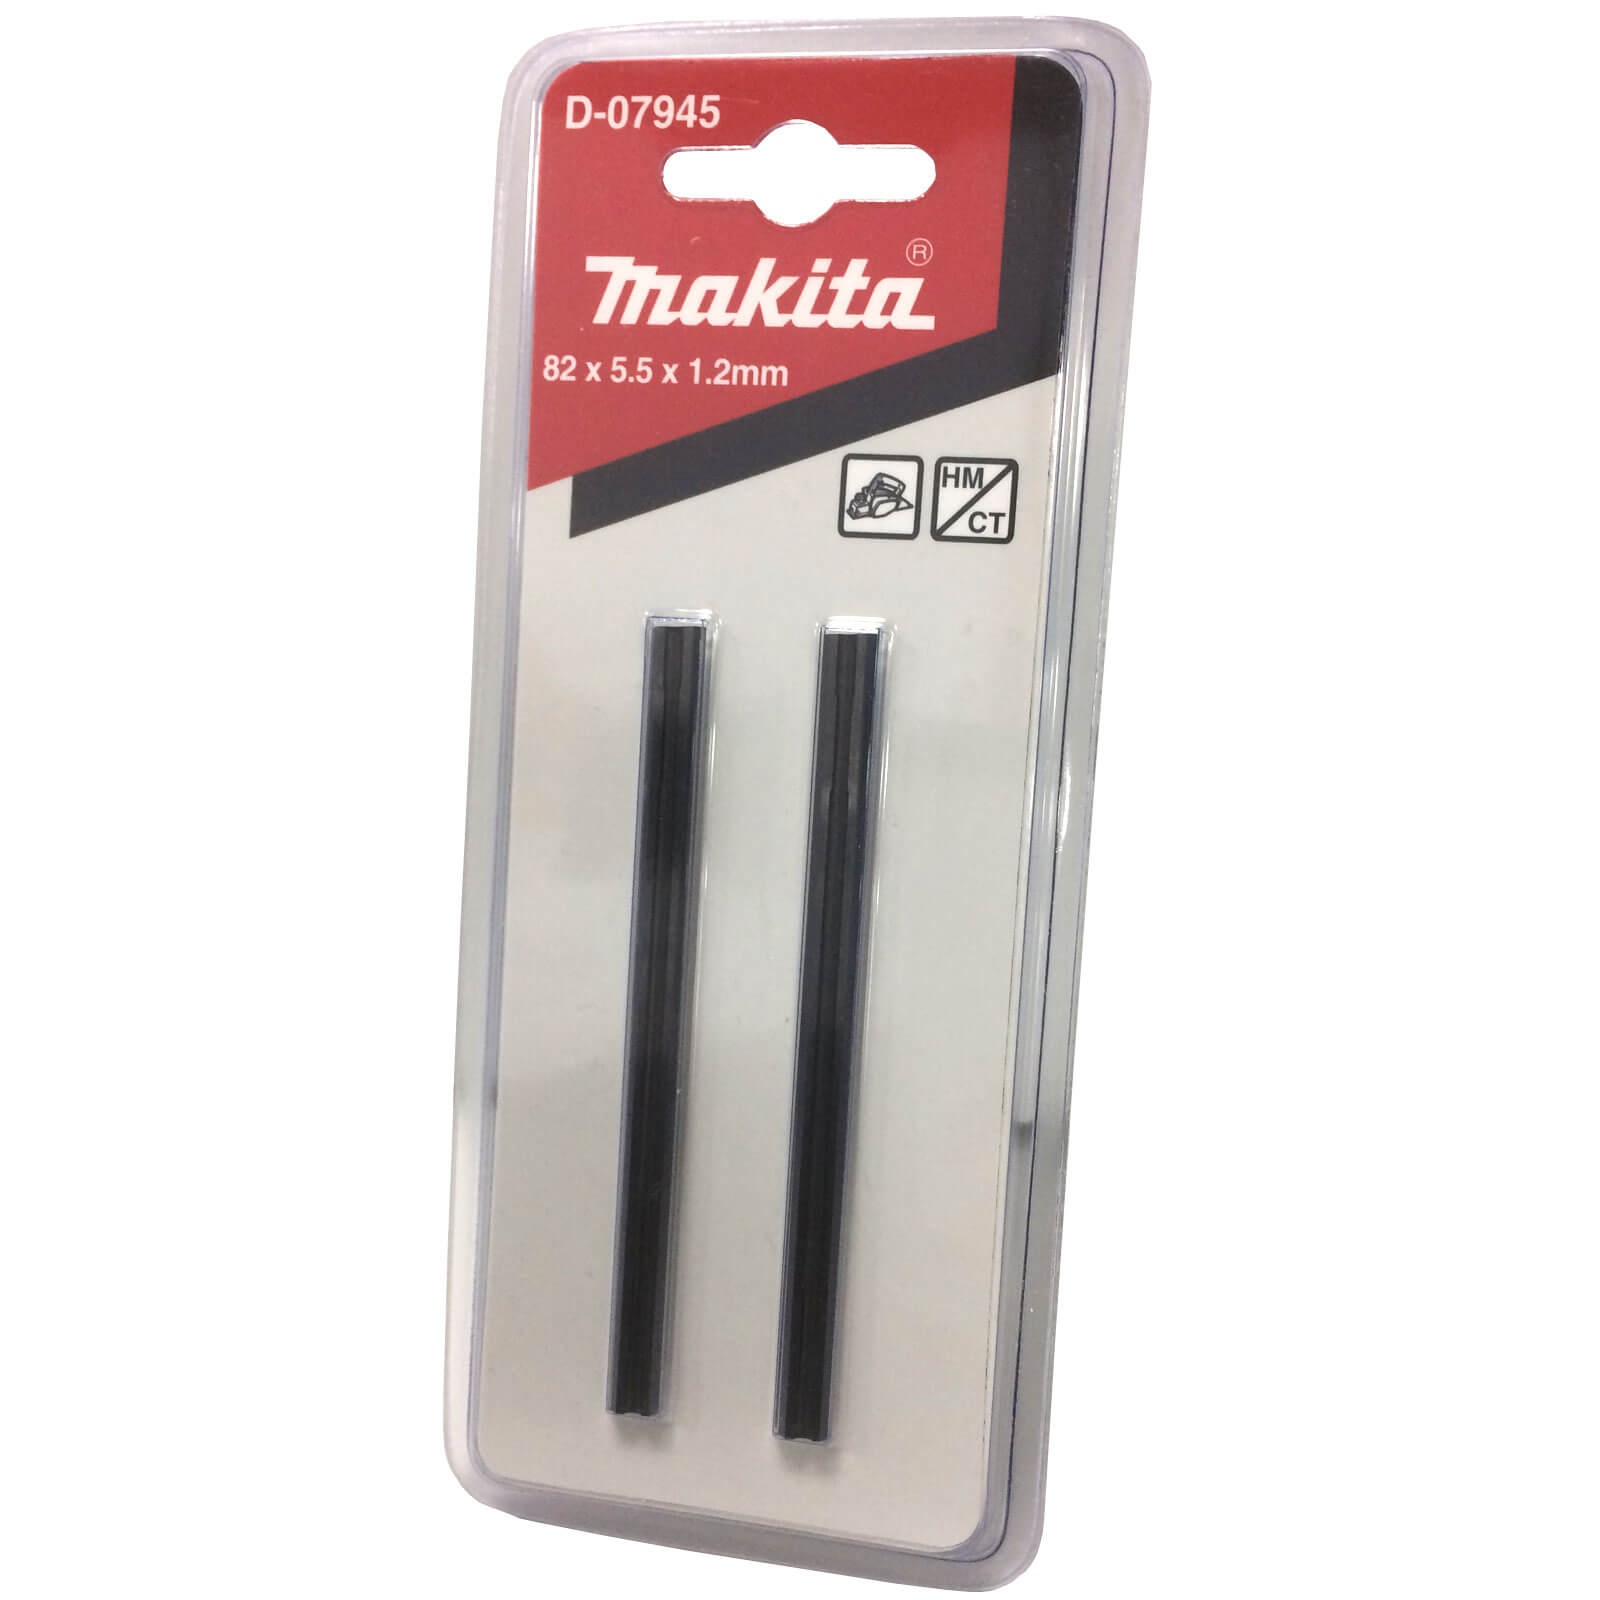 Image of Makita 82mm TCT Planer Blades Pack of 2